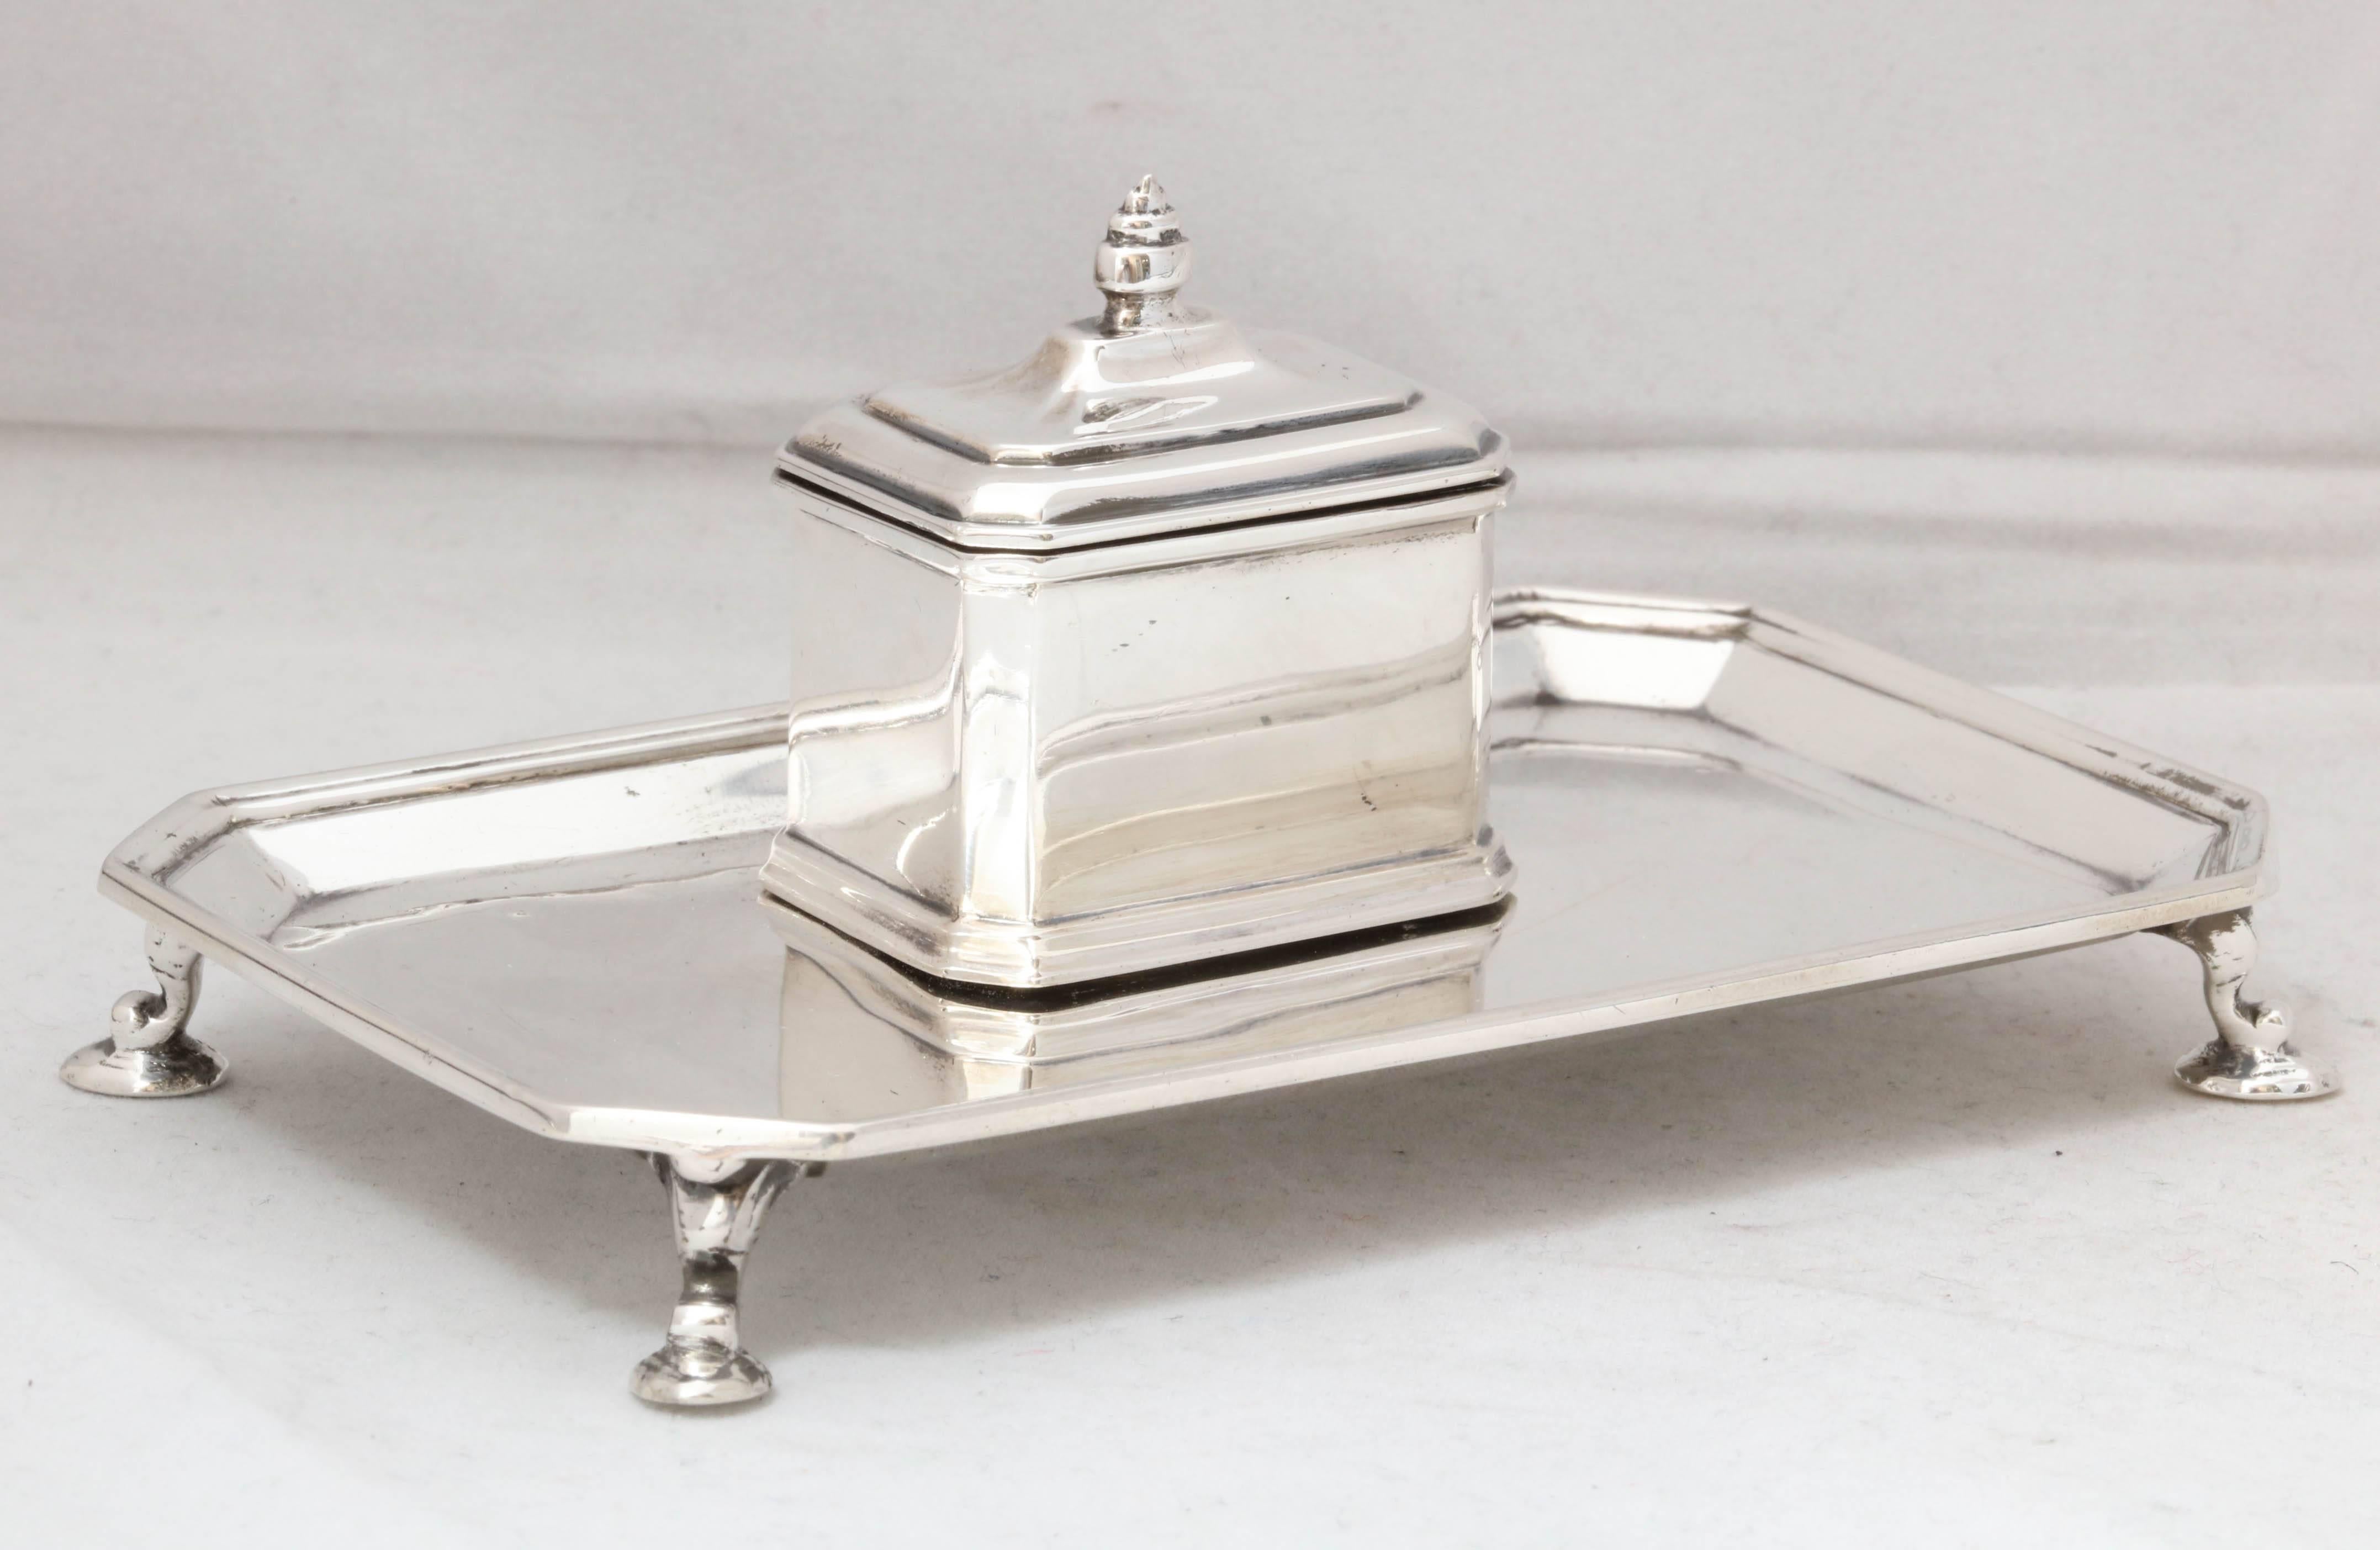 Art Deco, sterling silver inkwell on sterling silver footed inkstand,  Birmingham, England, year-hallmarked for 1927,  Mappin & Webb - makers. Has glass liner. Measures: 3 1/8 inches high x 5 1/4